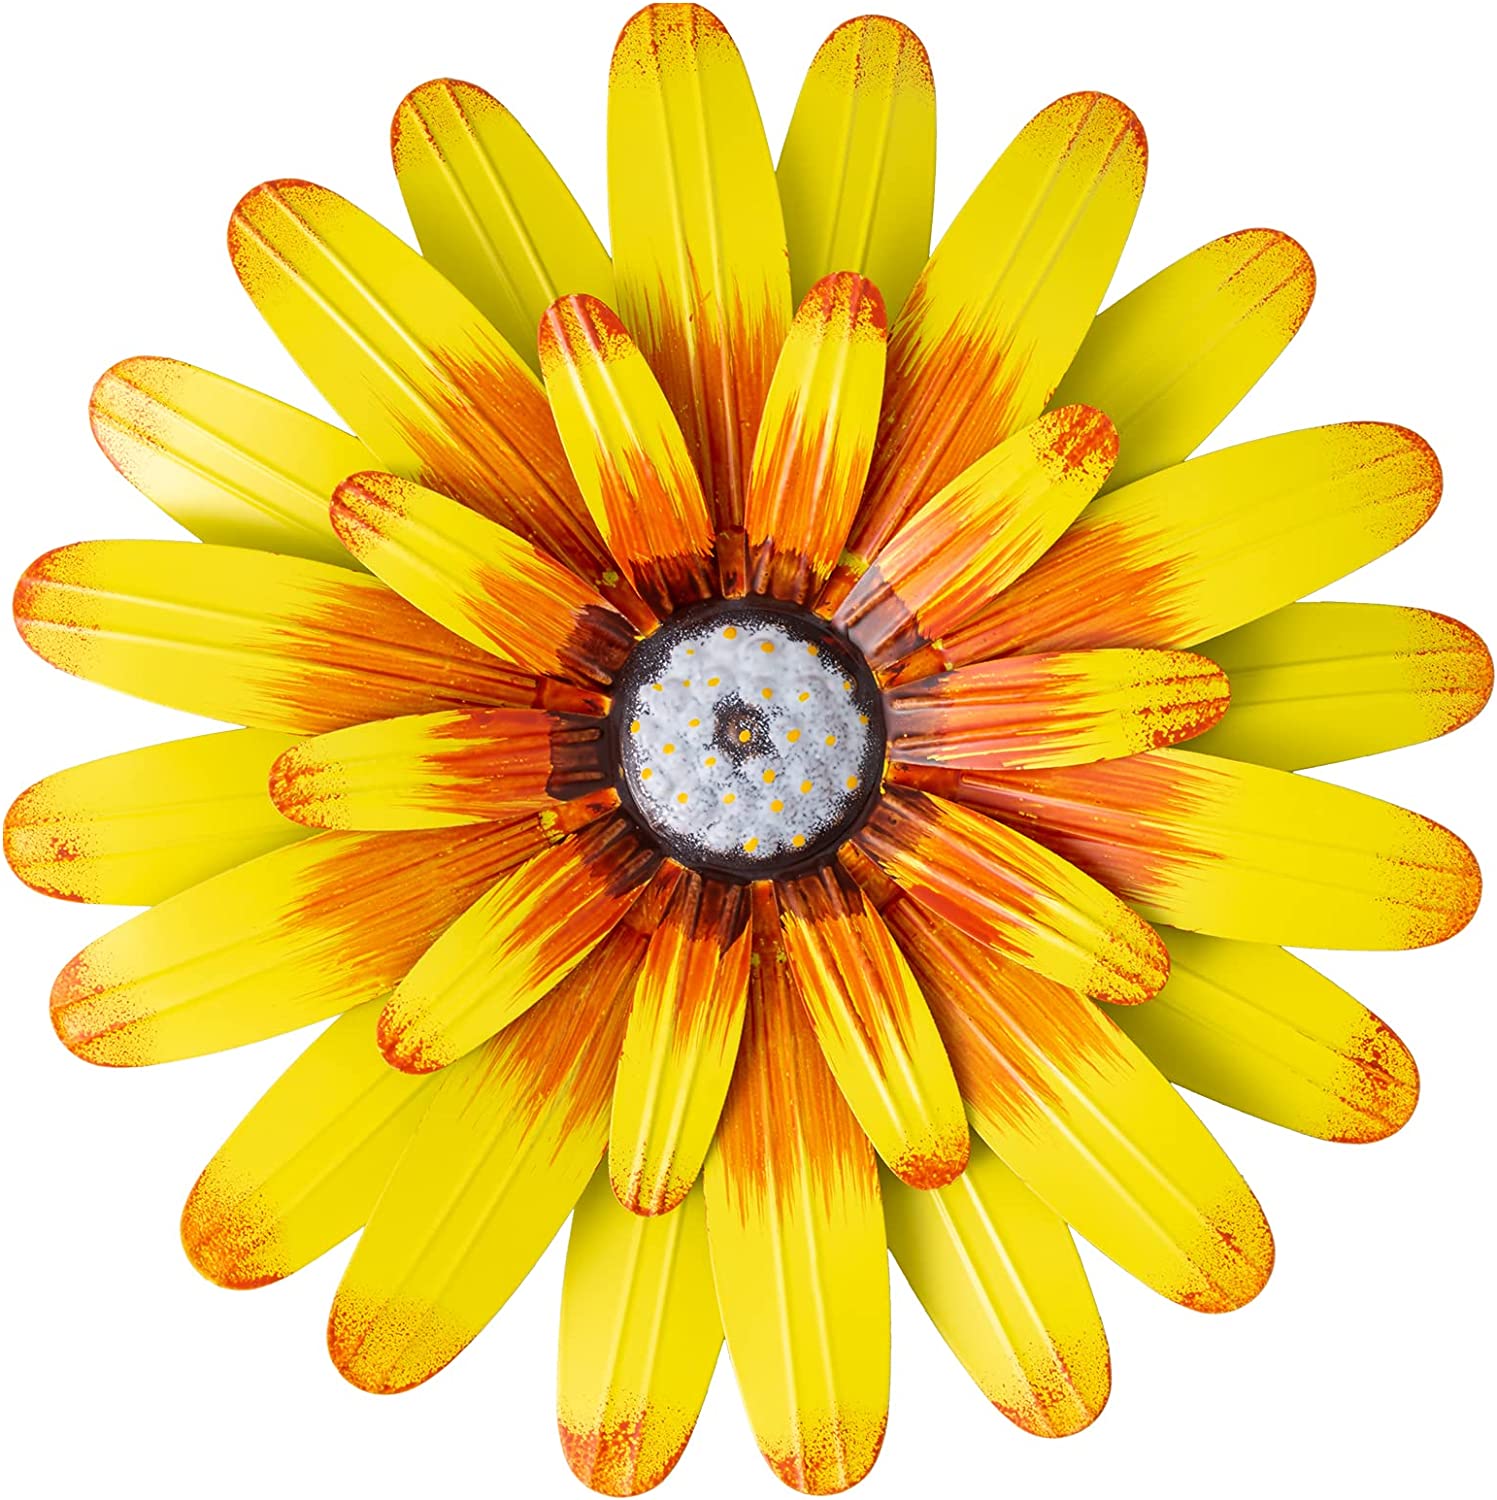 YEAHOME Hanging 3D Painted Metal Sunflower